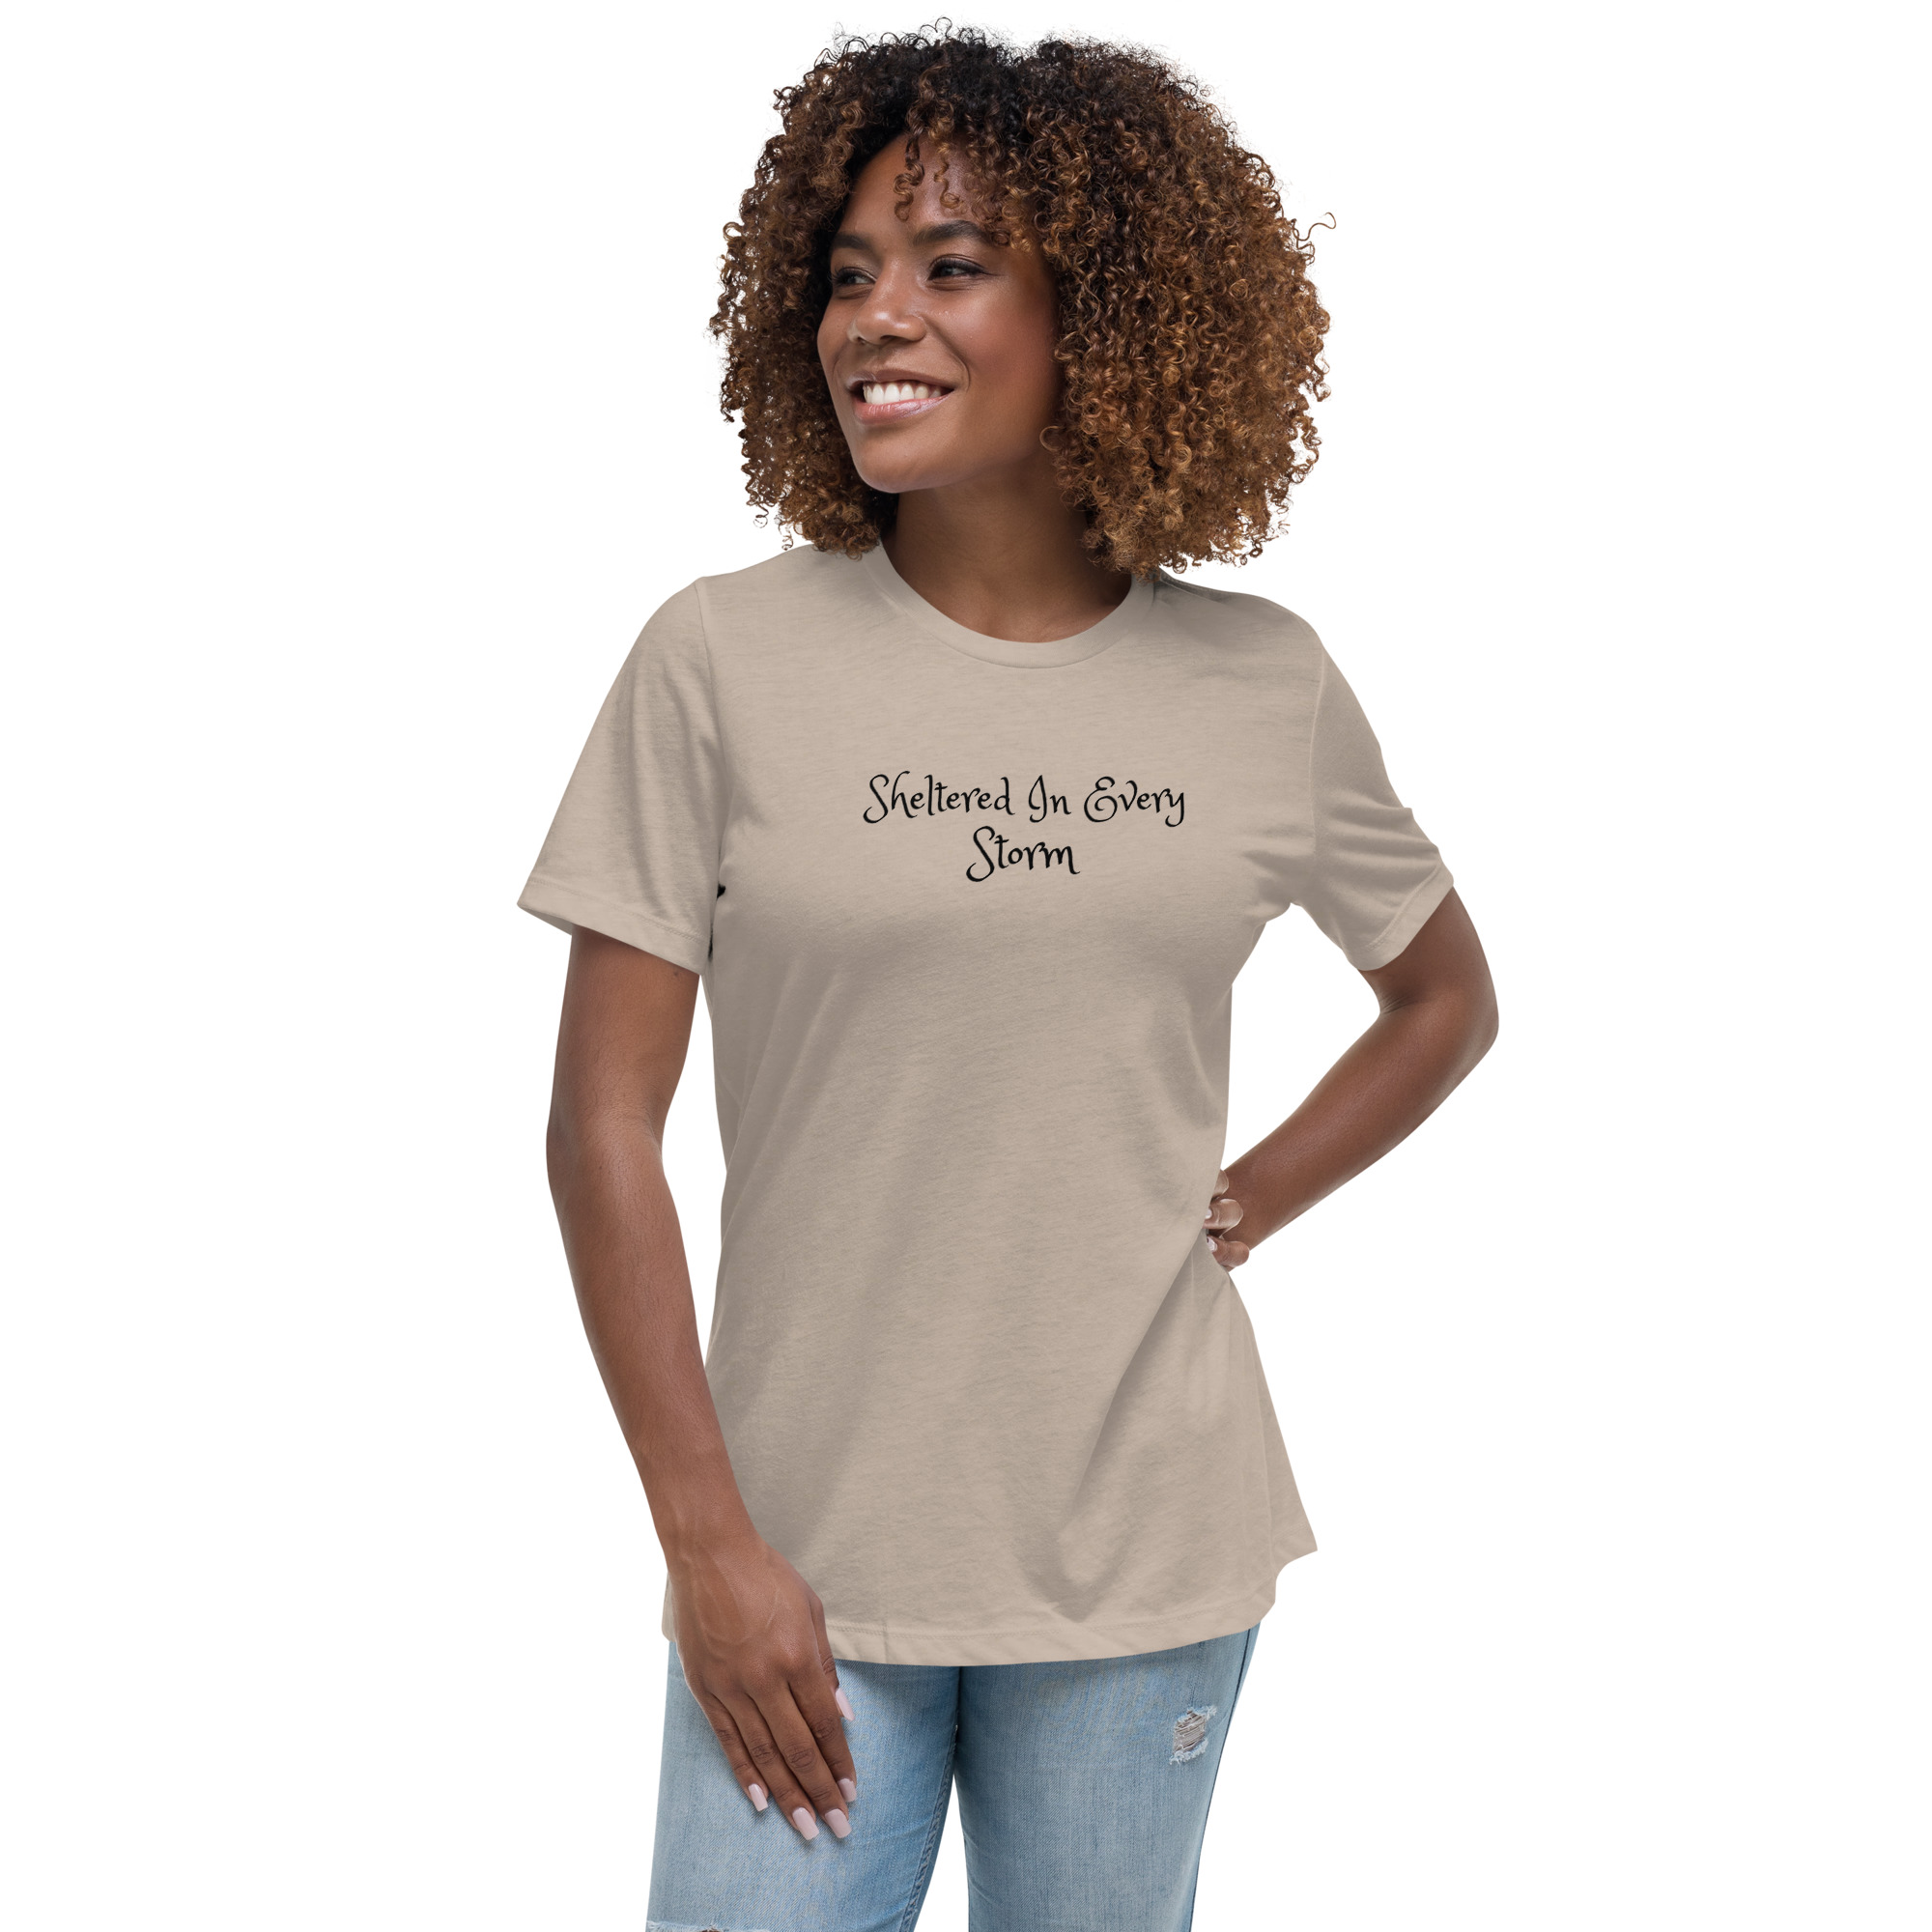 womens-relaxed-t-shirt-heather-stone-front-63227a7662d0f.jpg